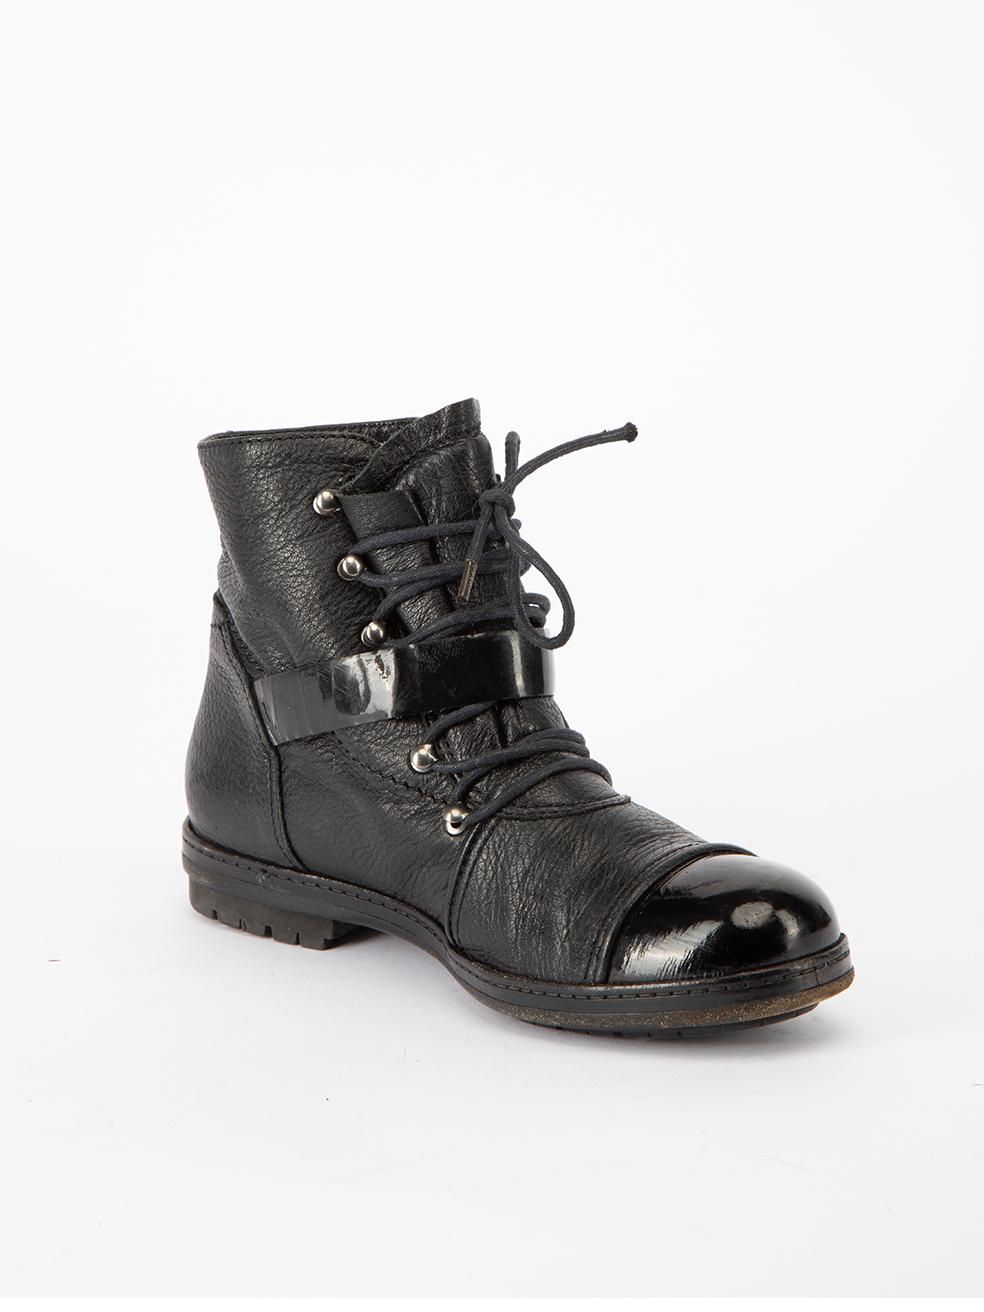 CONDITION is Very good. Minor wear to shoes is evident. Minimal creasing to leather material on this used Chanel designer resale item. 



Details


Black

Leather

Military style boots

Lace

Round toe

Flat heel

Patent leather toe cap

Buckle